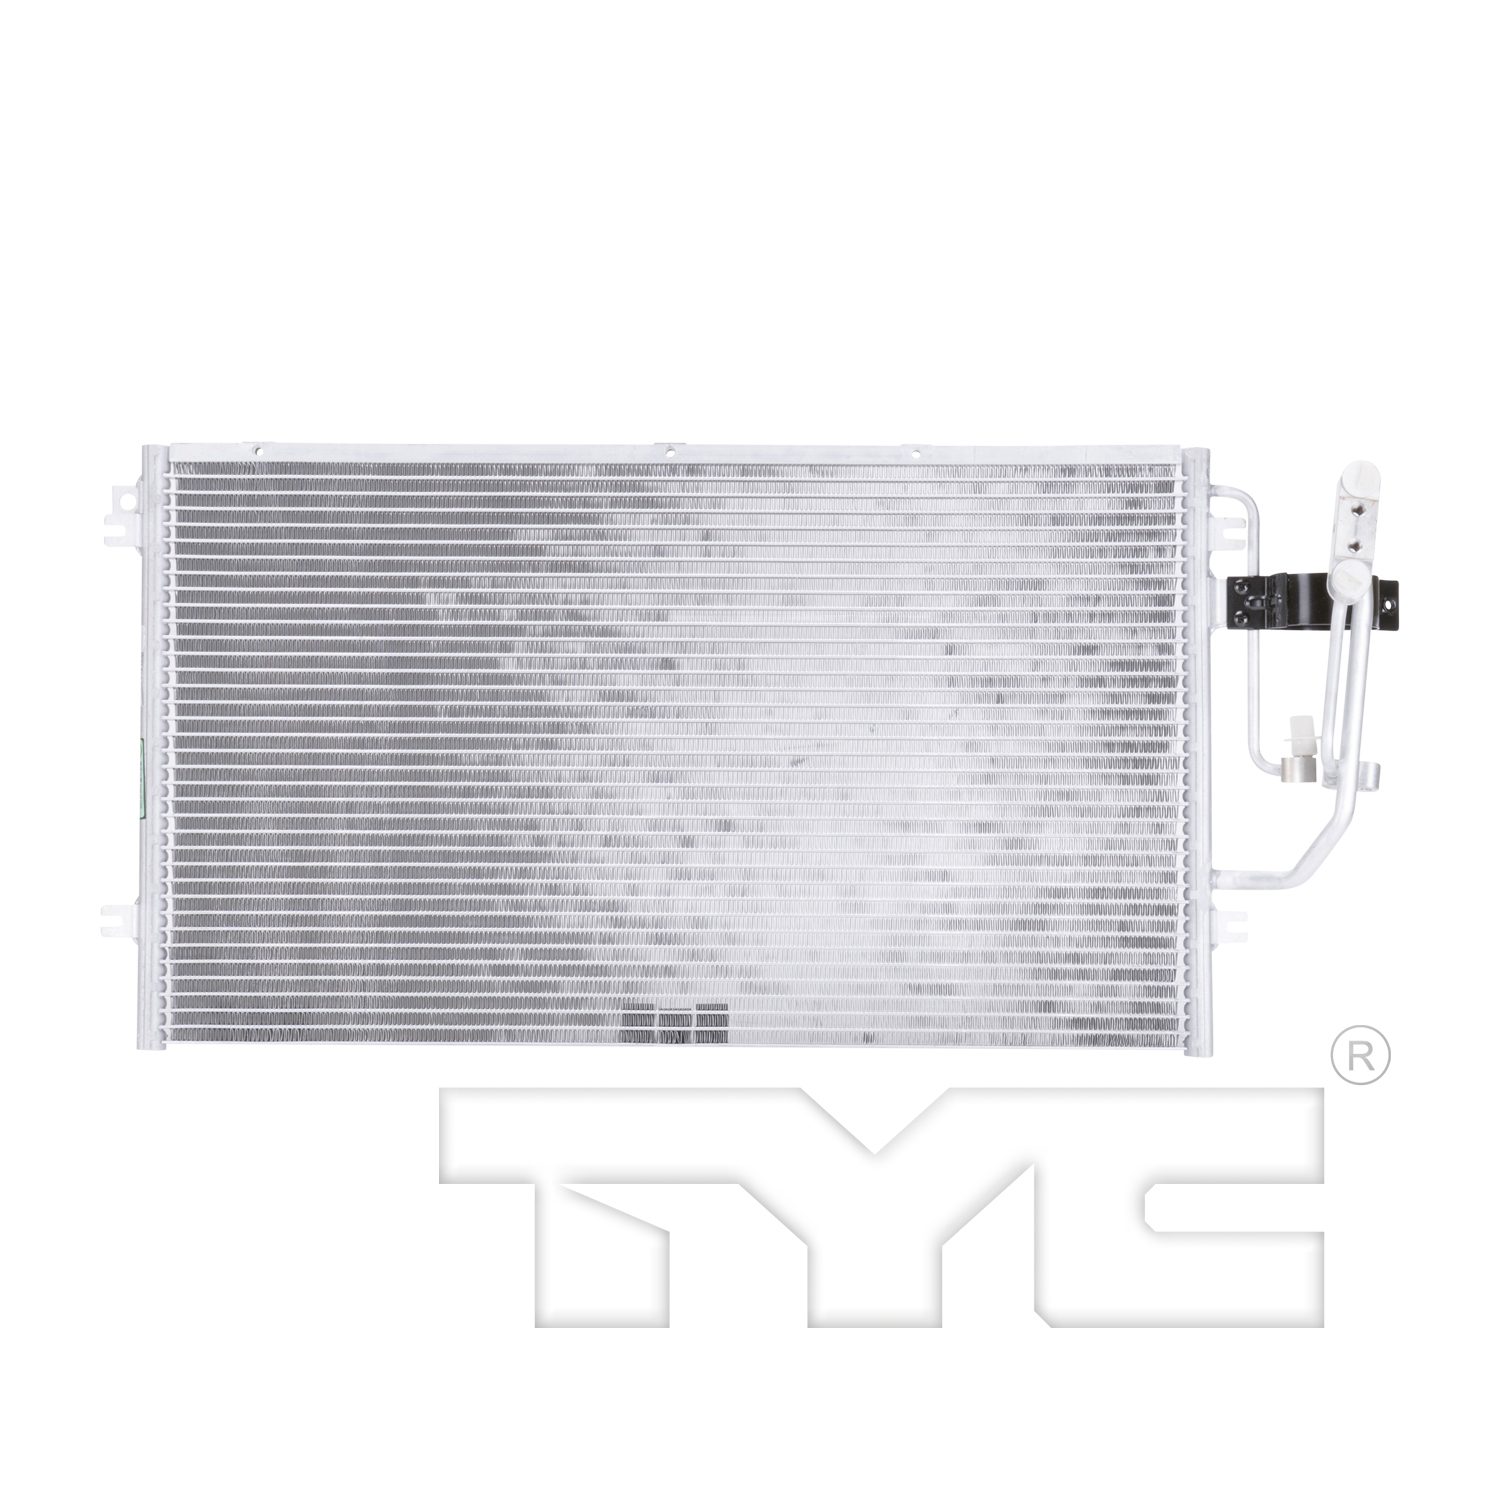 Aftermarket AC CONDENSERS for SATURN - LW300, LW300,01-03,Air conditioning condenser